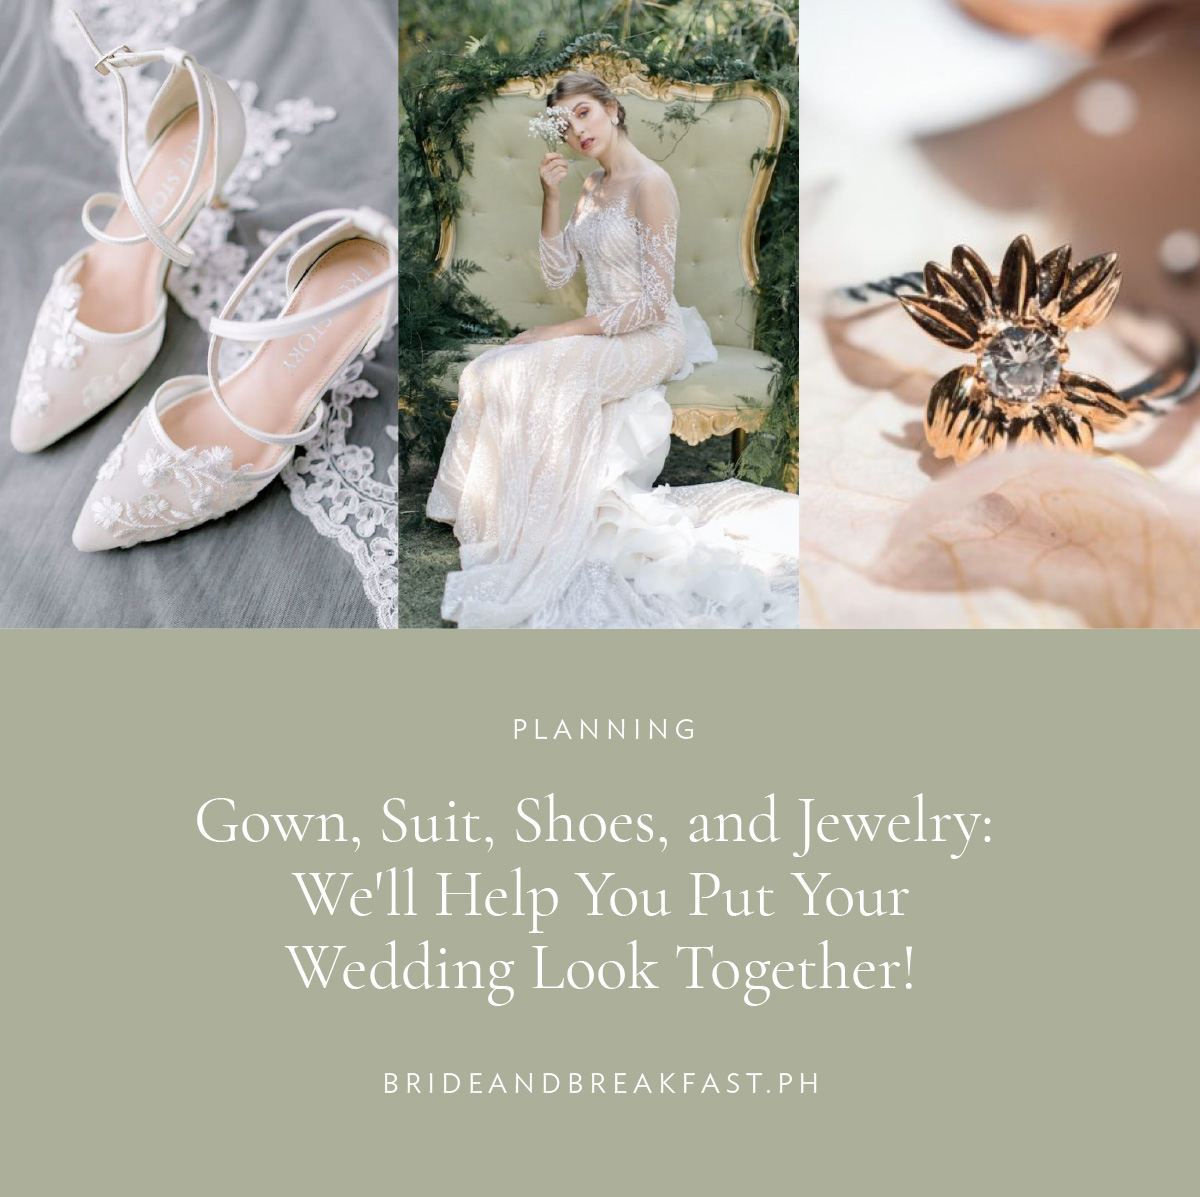 Gown, Suit, Shoes, and Jewelry: We'll Help You Put Your Wedding Look Together!